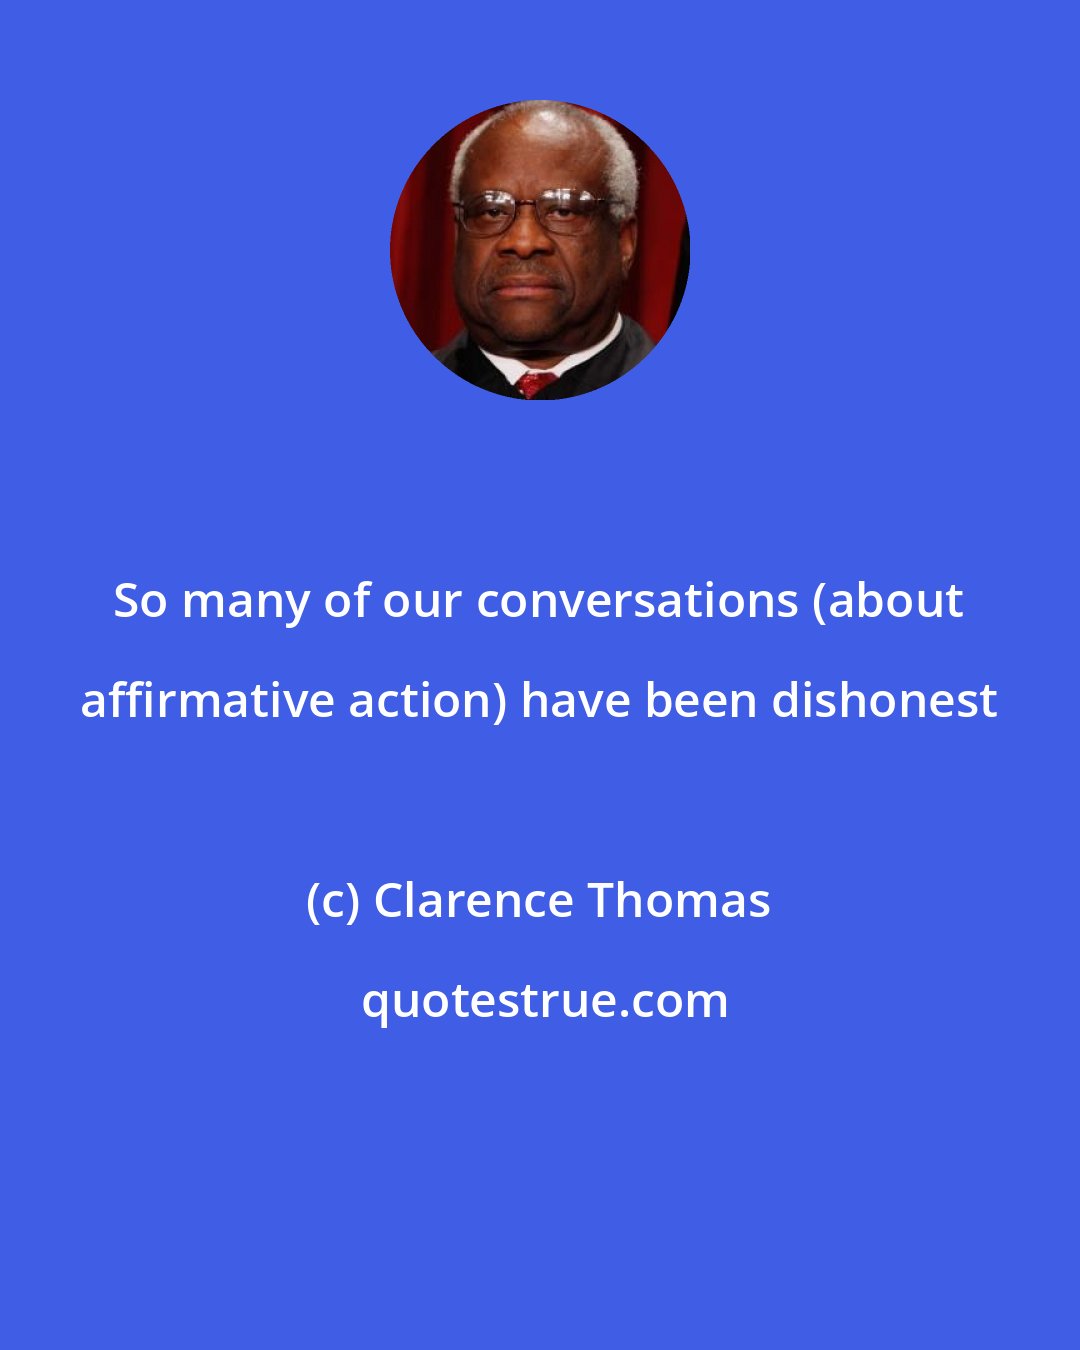 Clarence Thomas: So many of our conversations (about affirmative action) have been dishonest